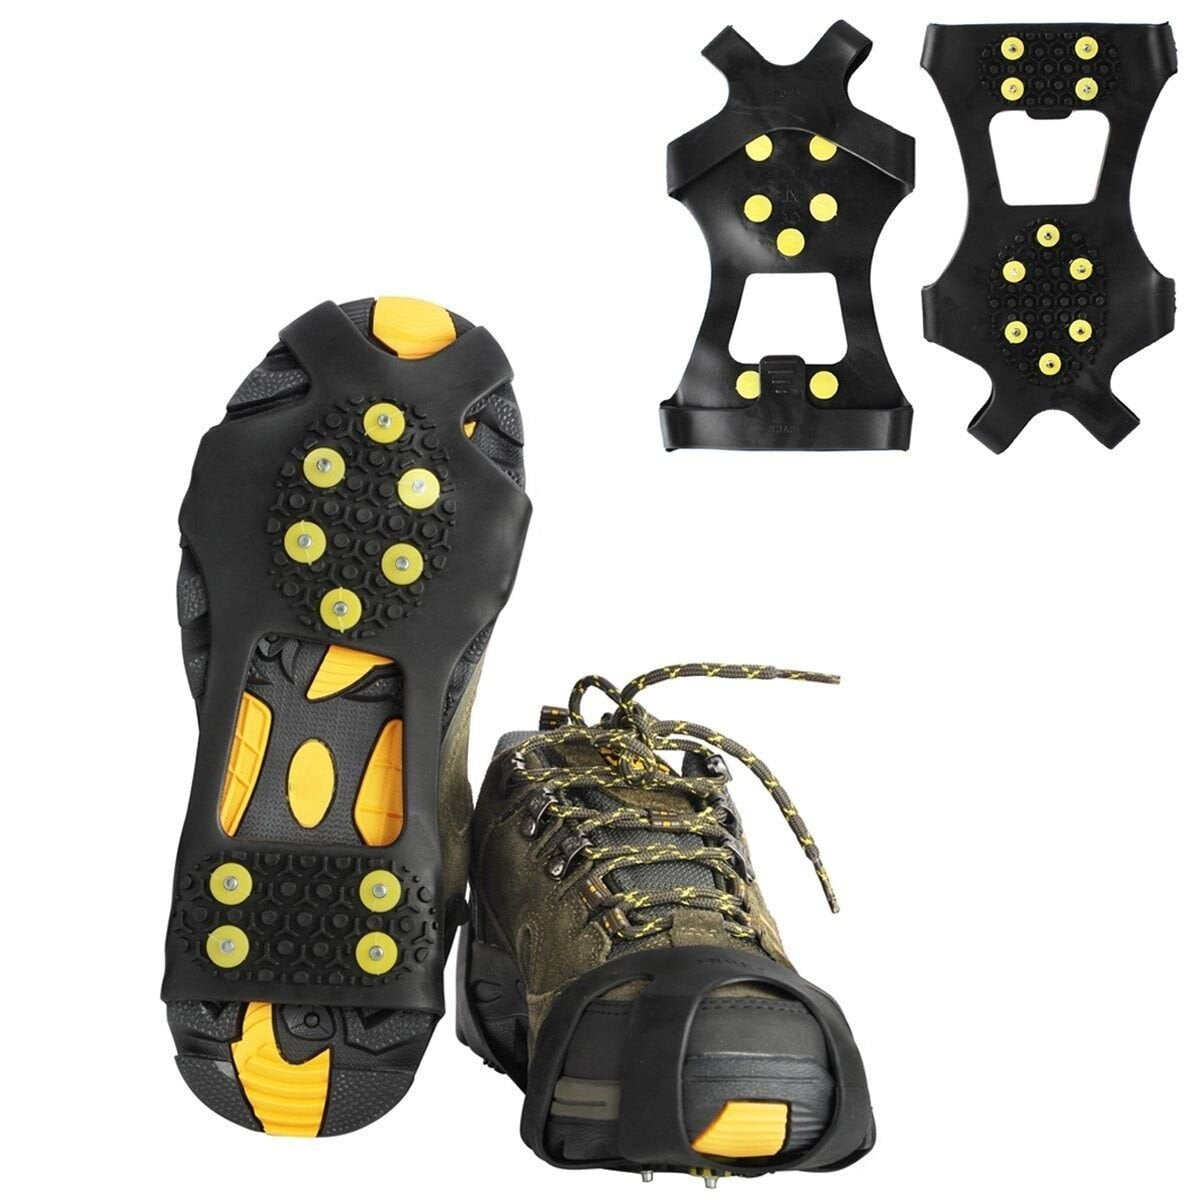  2 Pairs Non Slip Gripper Spikes Ice Cleats Snow Traction Cleats  Crampons for Women Men Walking and Running on Snow and Ice (Black) :  Clothing, Shoes & Jewelry